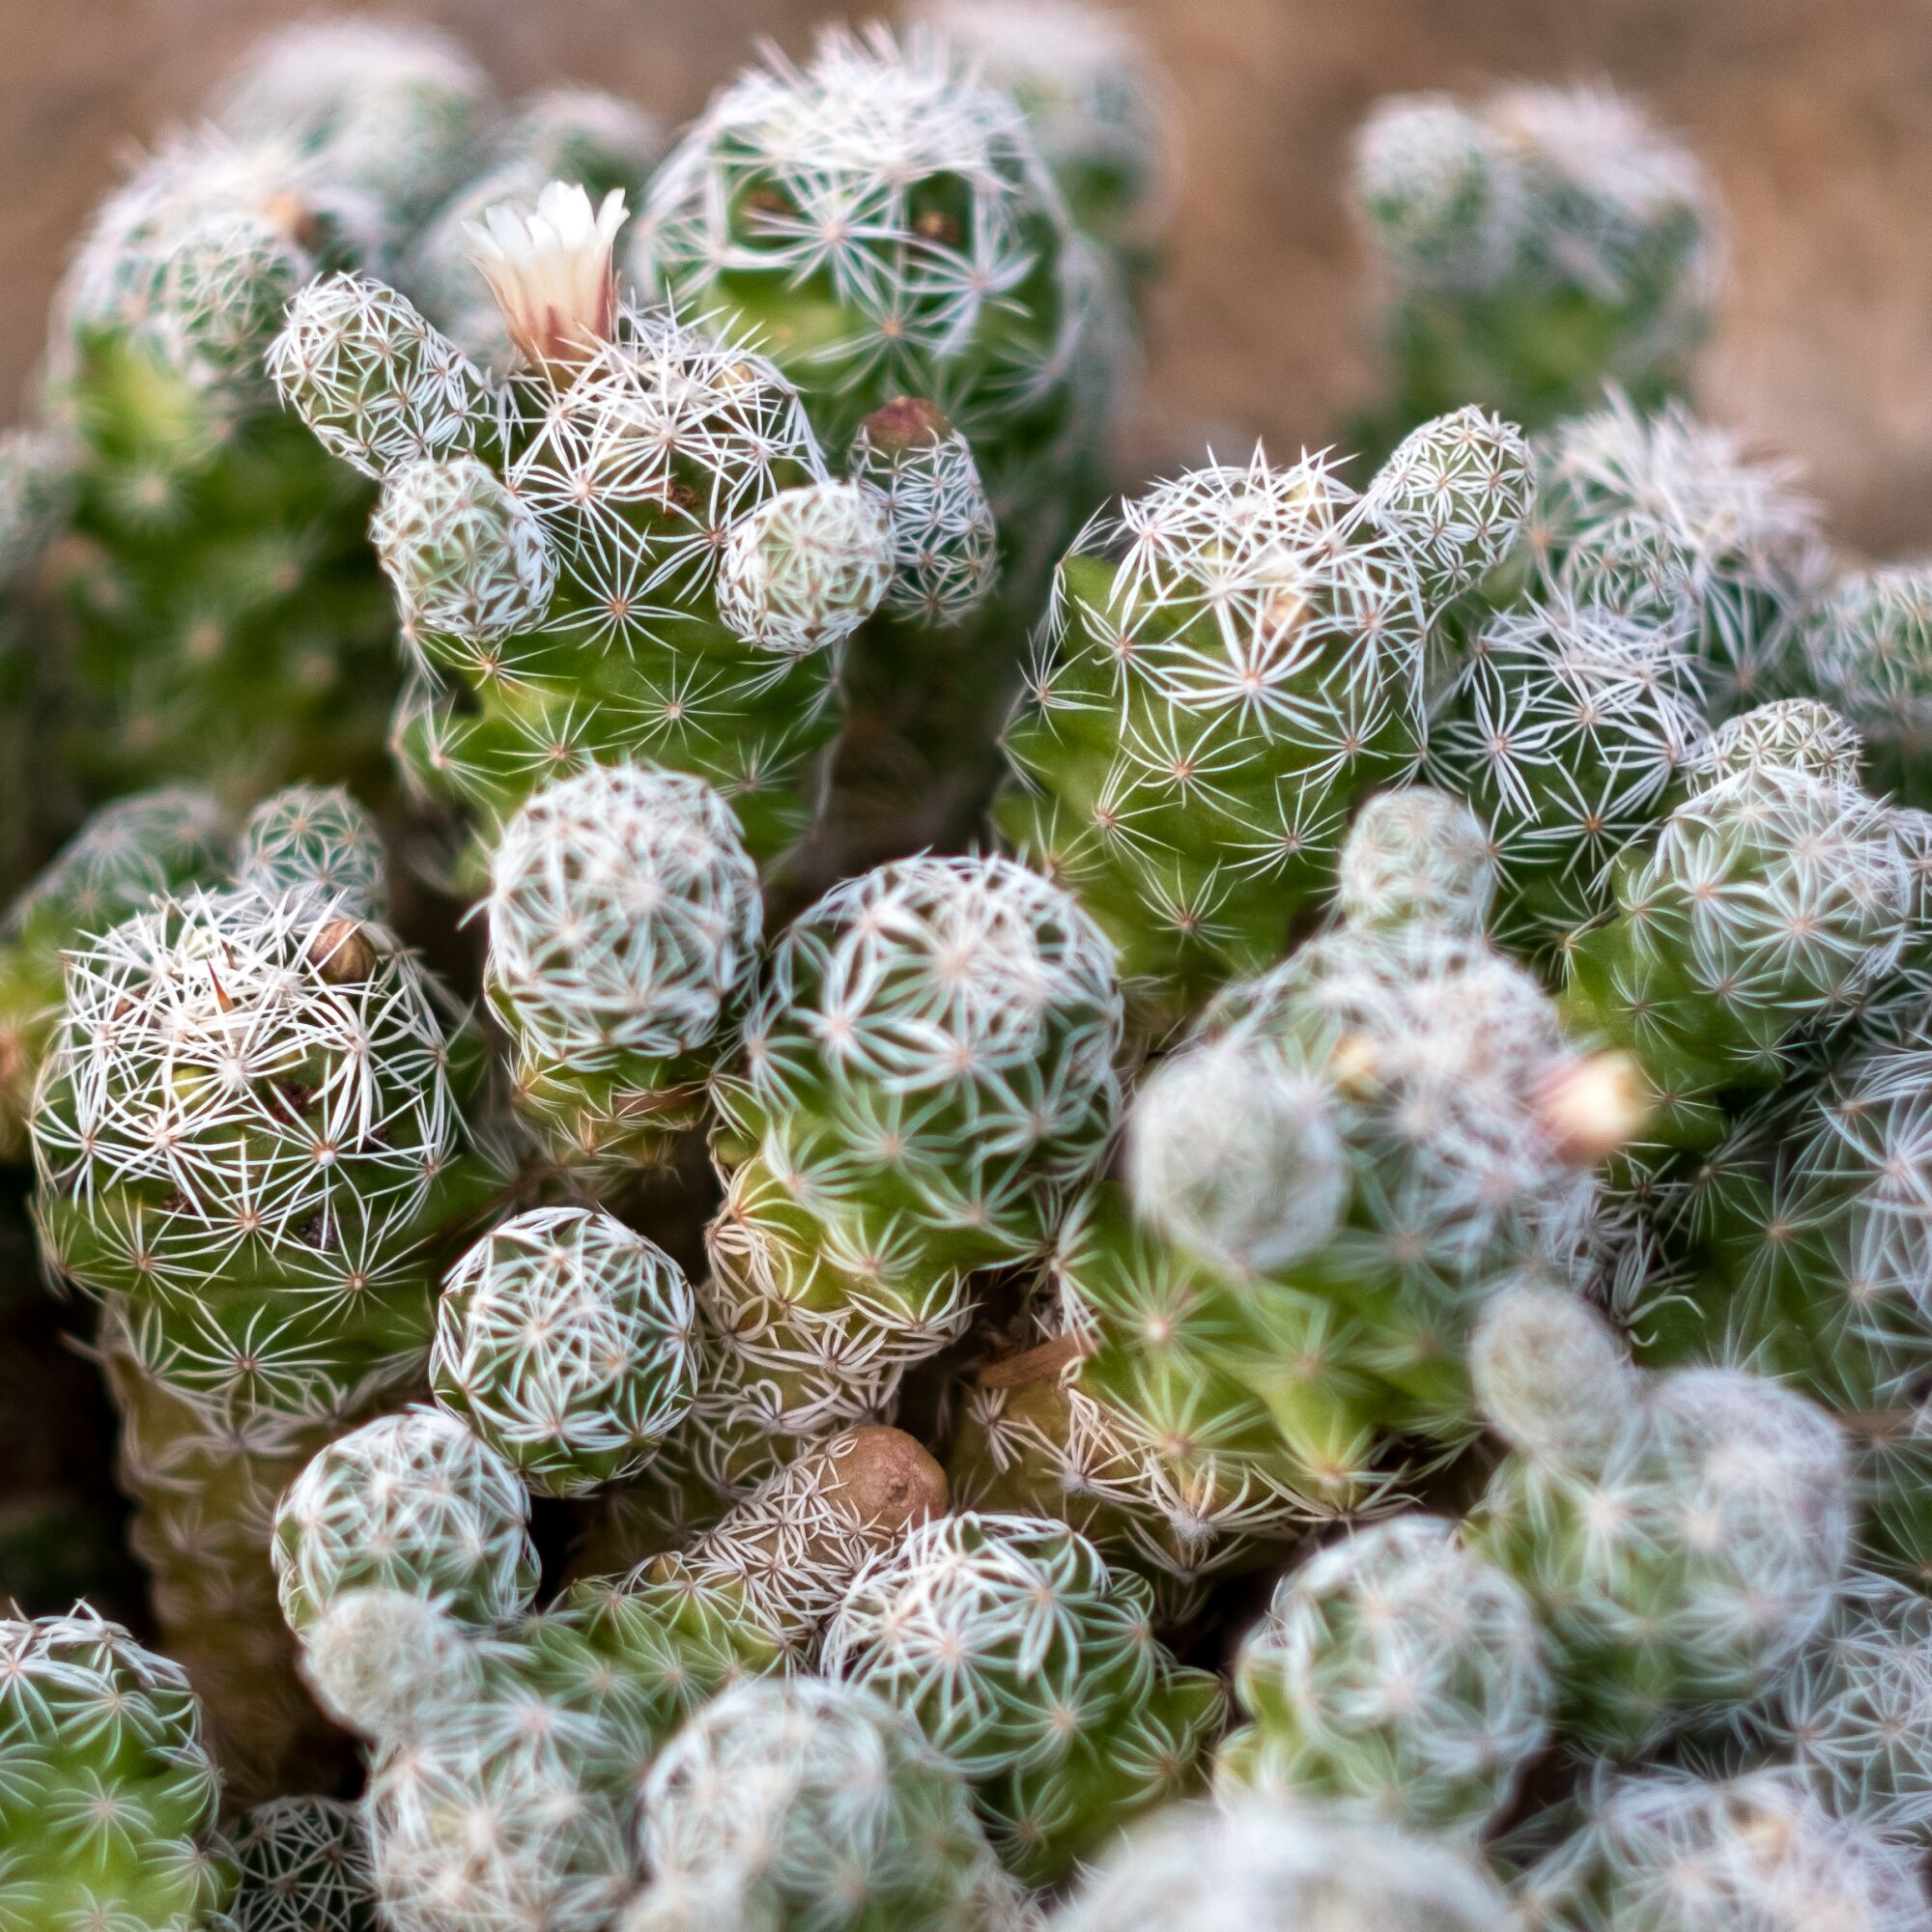 A cactus made up of small rounded parts with a white cast over their green bodies.